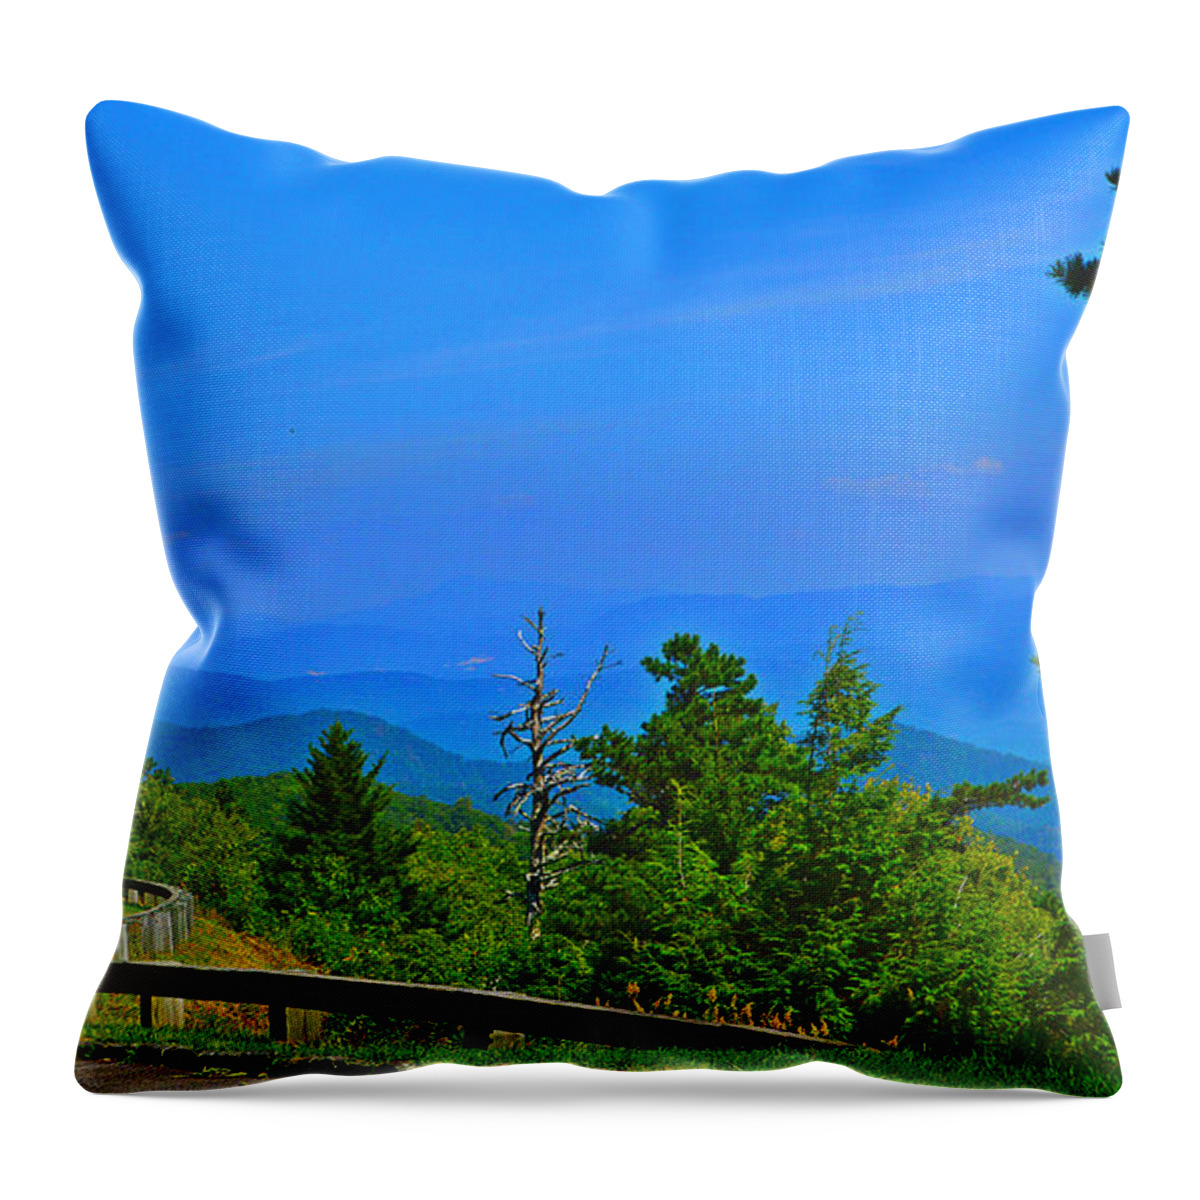 Scenery Blue Ridge Throw Pillow featuring the photograph Scenic Blue Ridge Drive by Stacie Siemsen